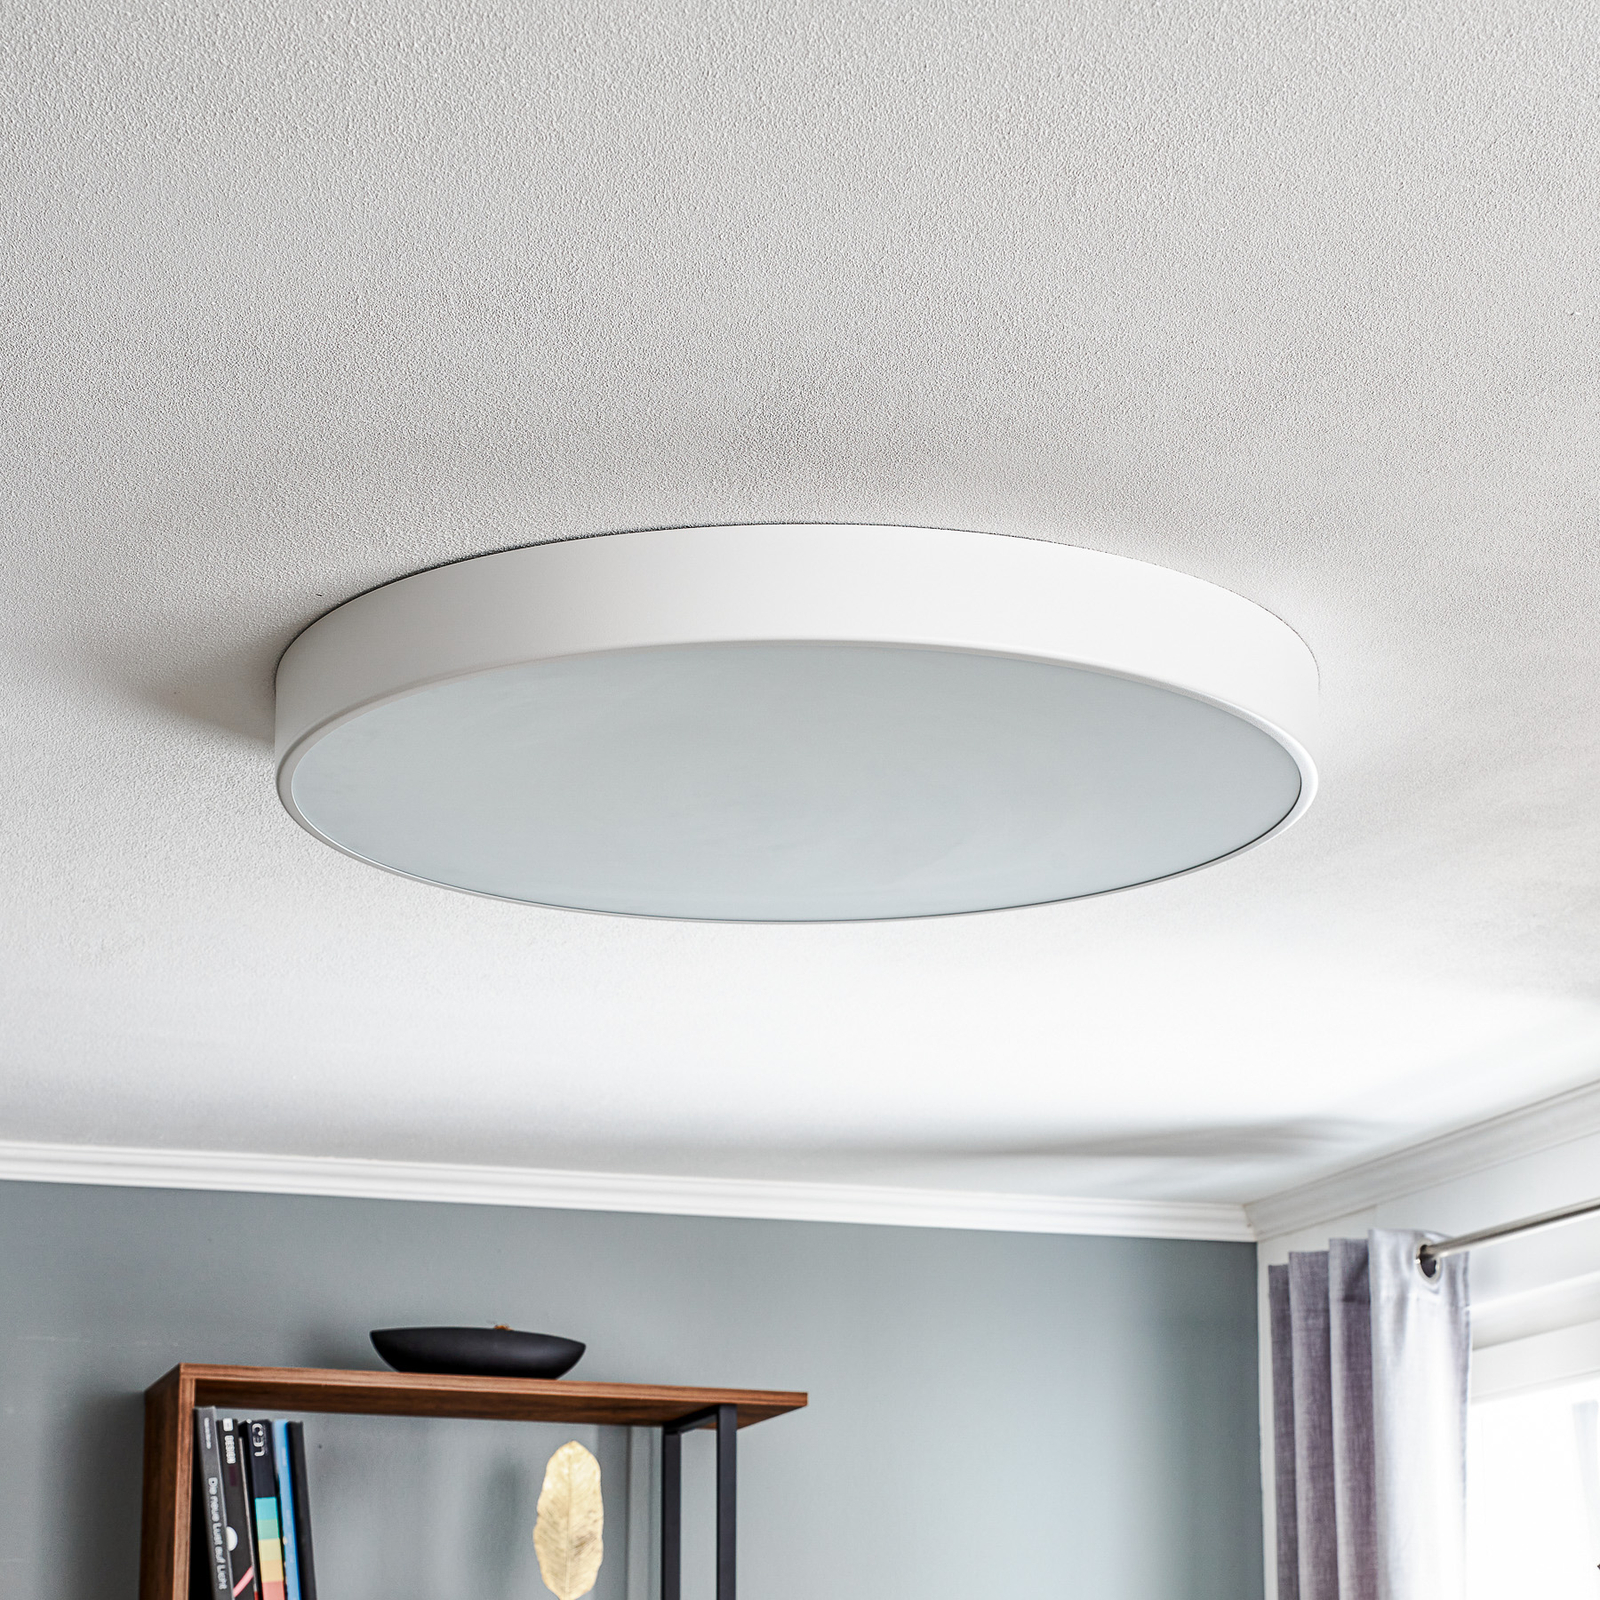 Cleo ceiling lamp in white with diffuser, Ø 78cm